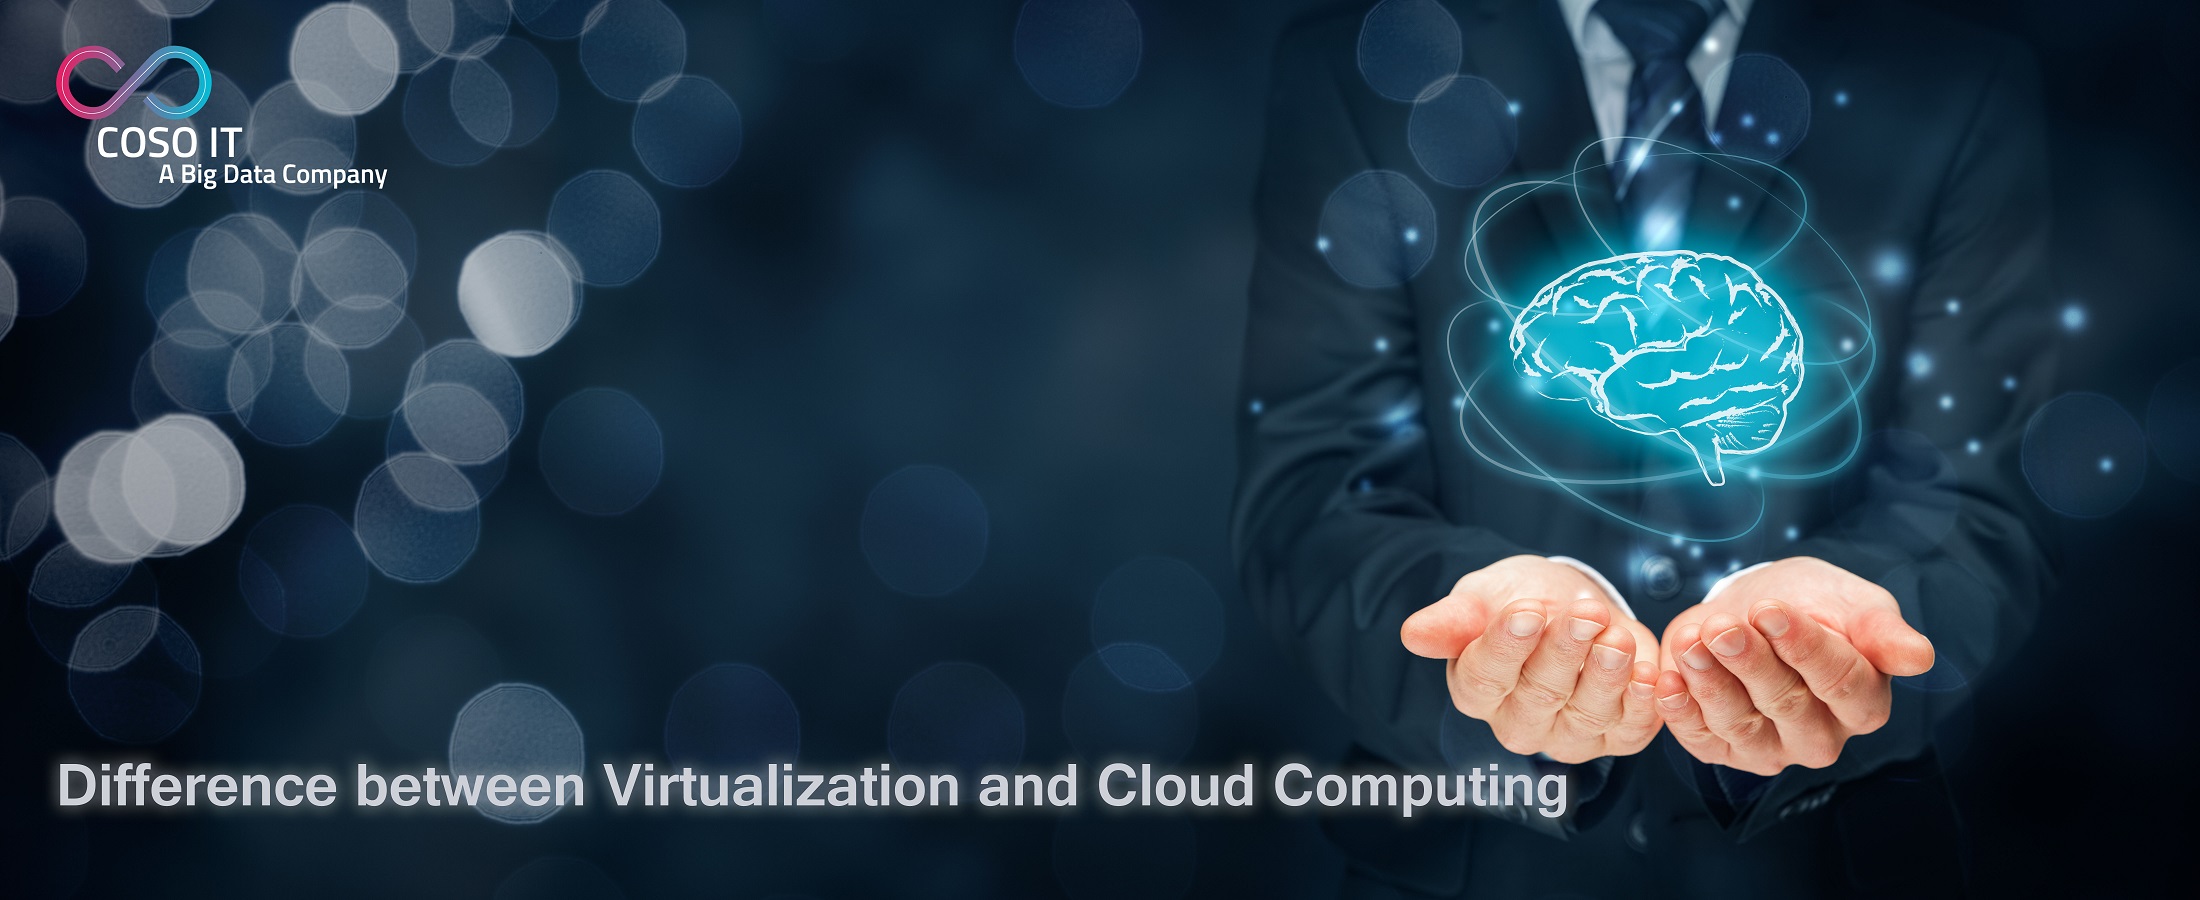 Difference between Virtualization and Cloud Computing